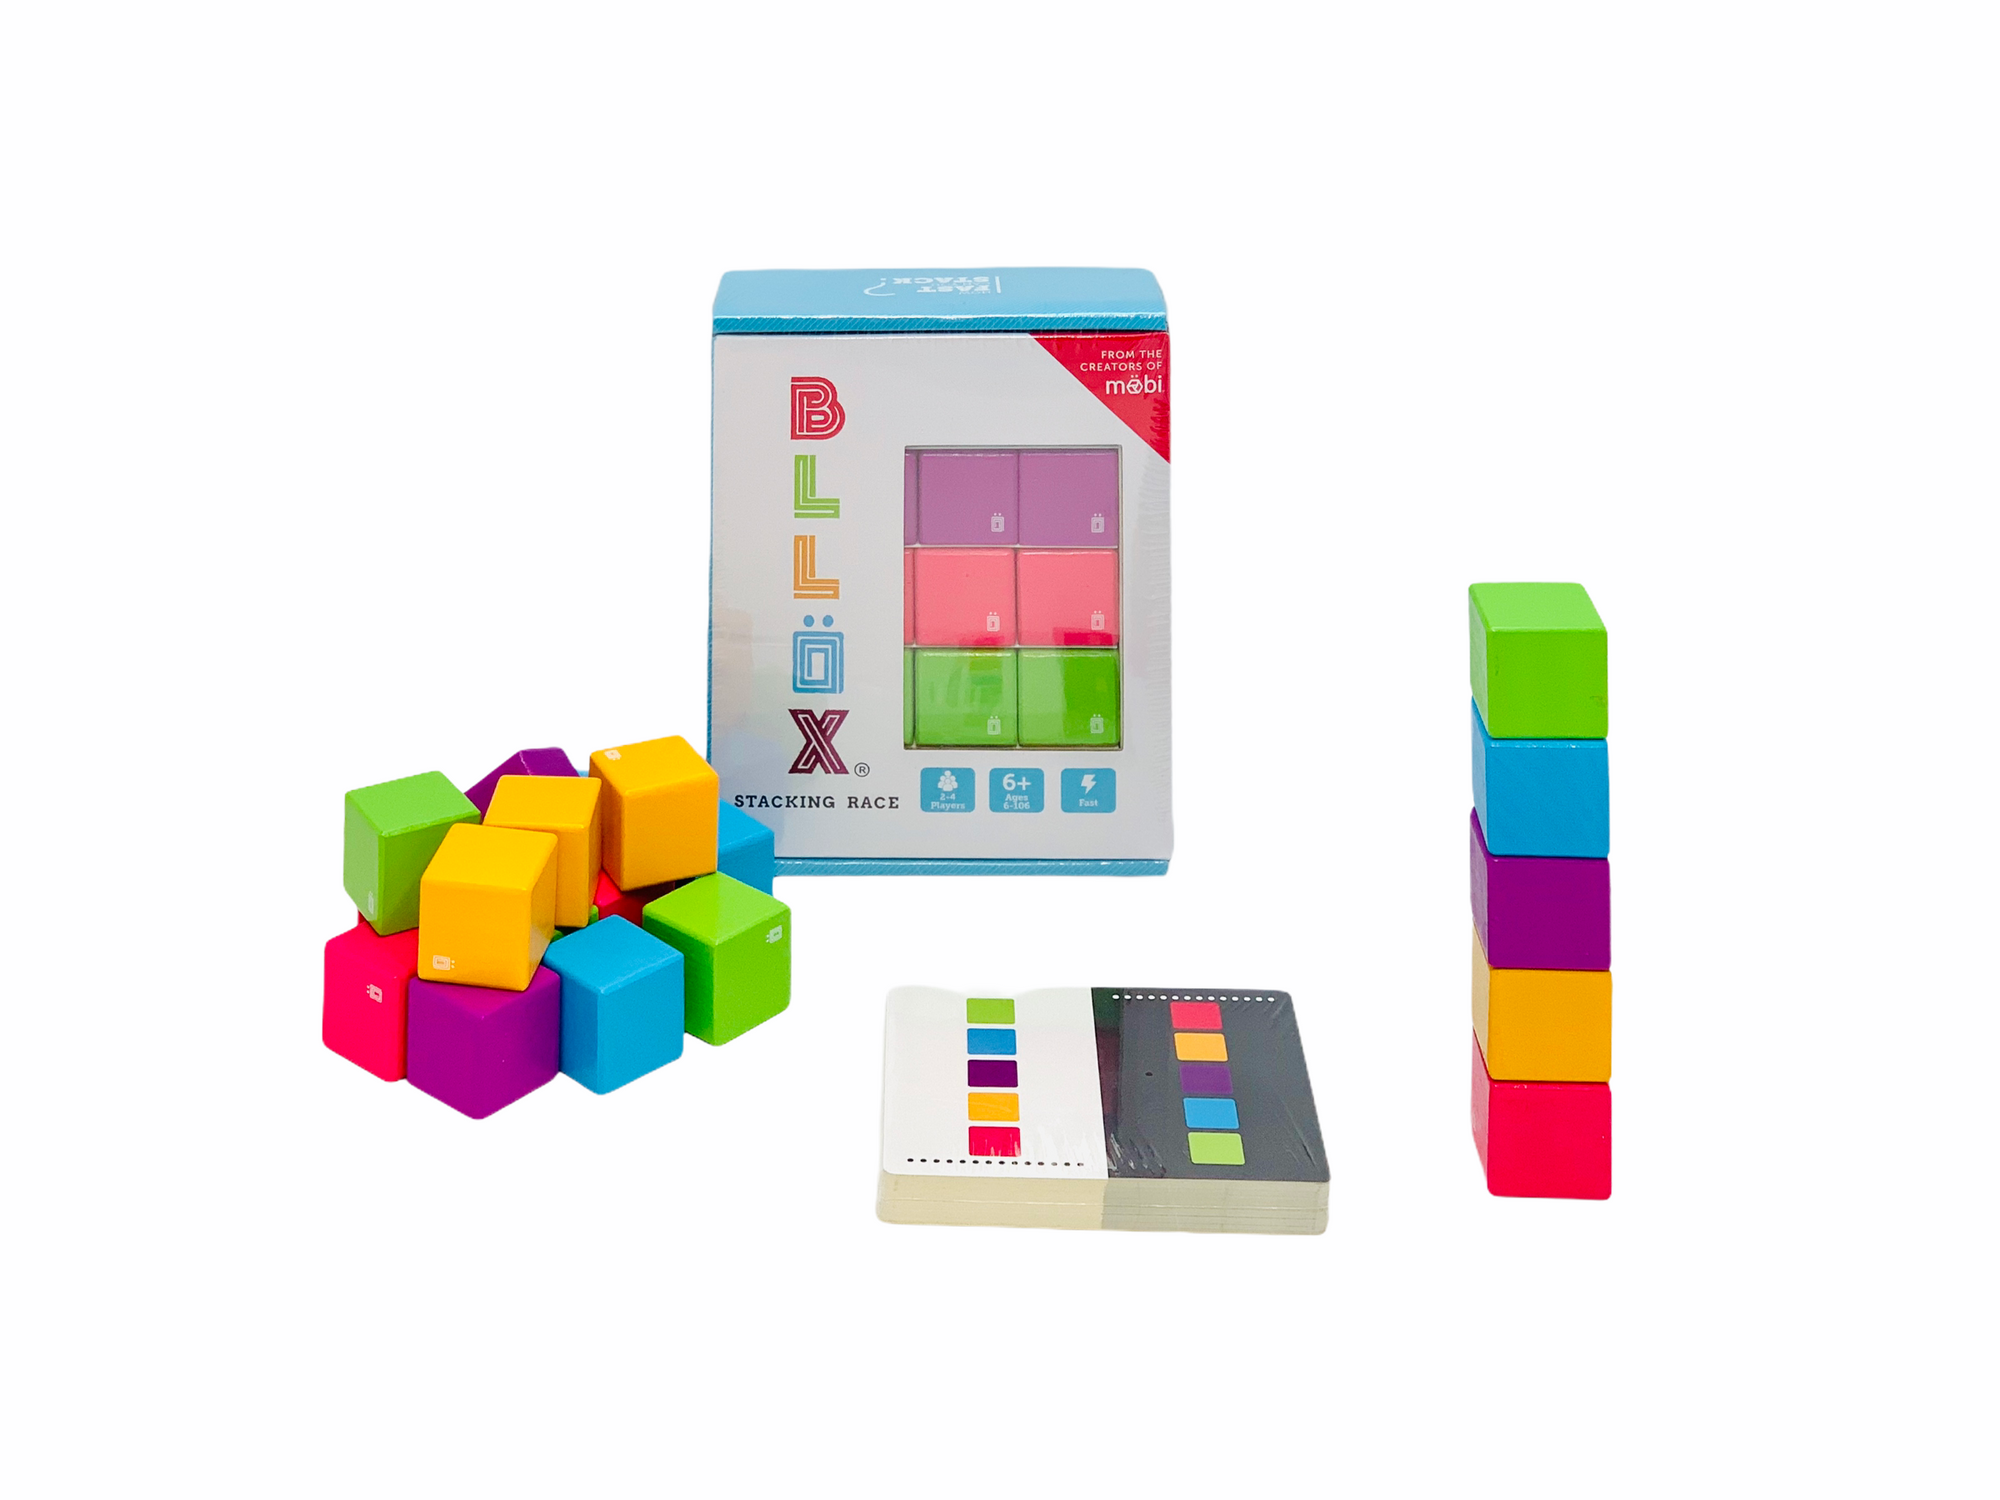 BLLOX Stacking Race Game with coloured blocks and playing cards laid out in front of packaging on white background